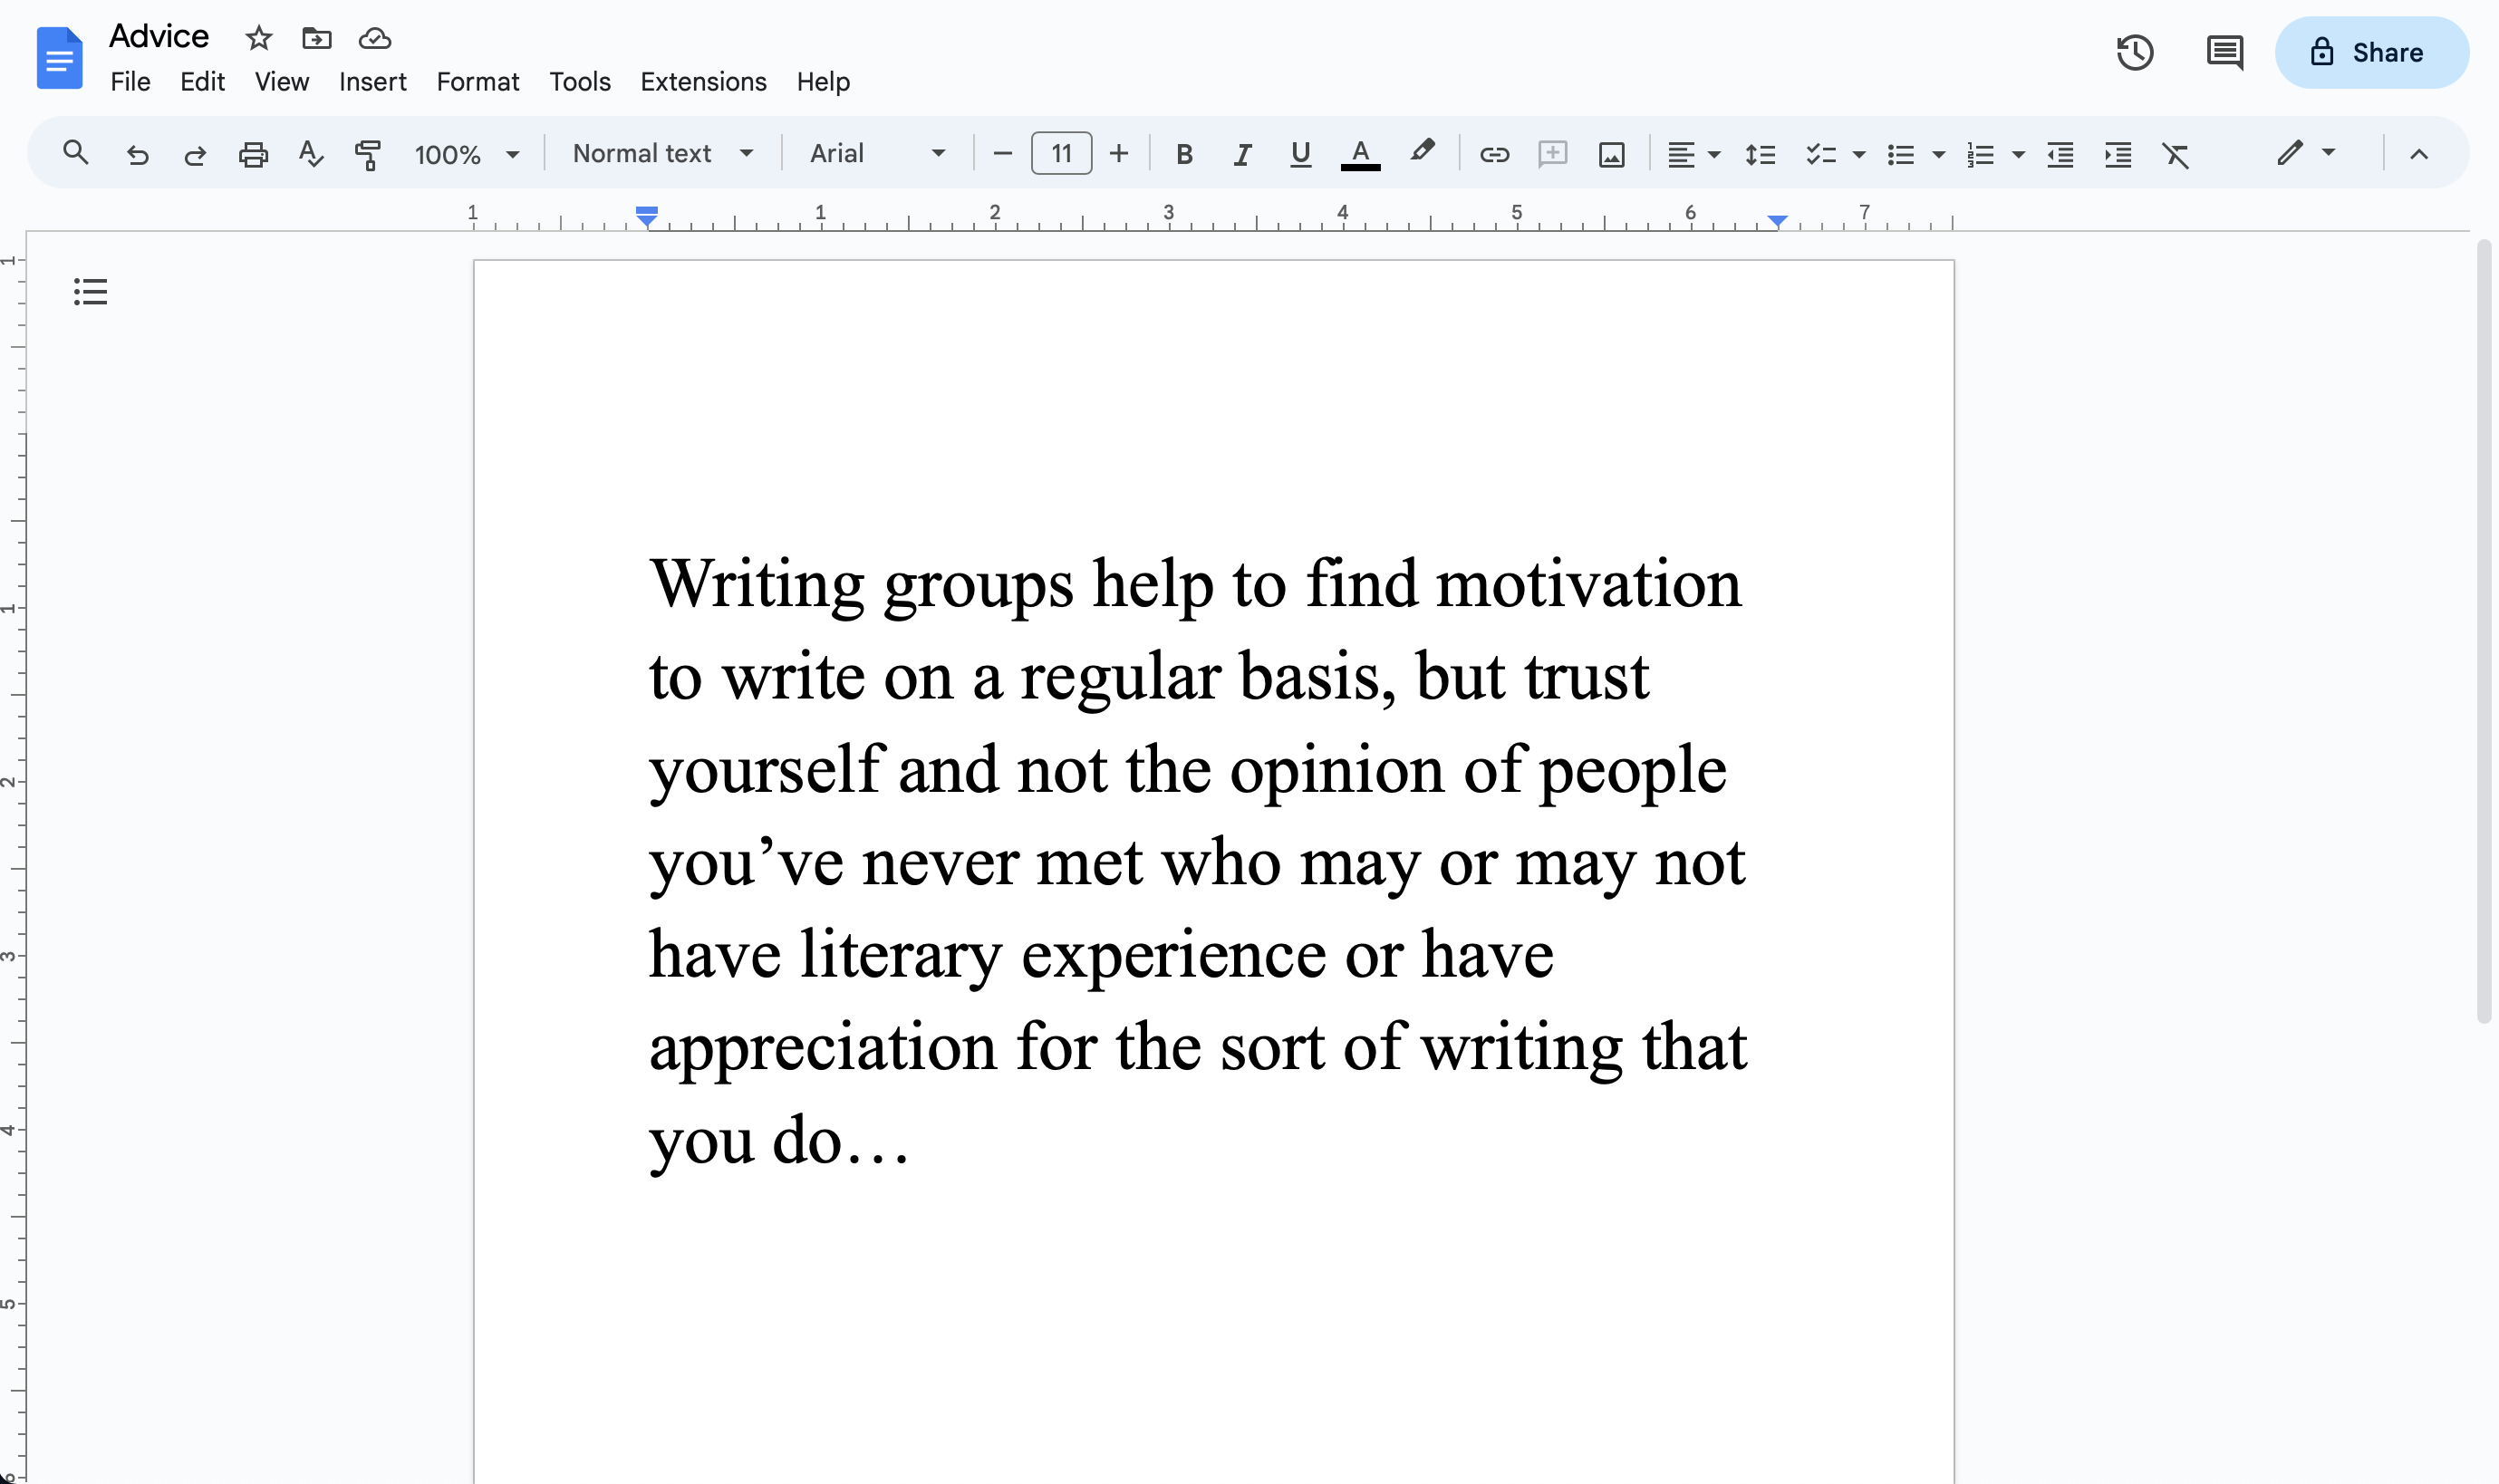 A screenshot of an open Word document that reads: "Writing groups help to find motivation to write on a regular basis, but trust yourself and not the opinion of people you've never met or who may not have literary experience or have appreciation for the sort of writing that you do..."